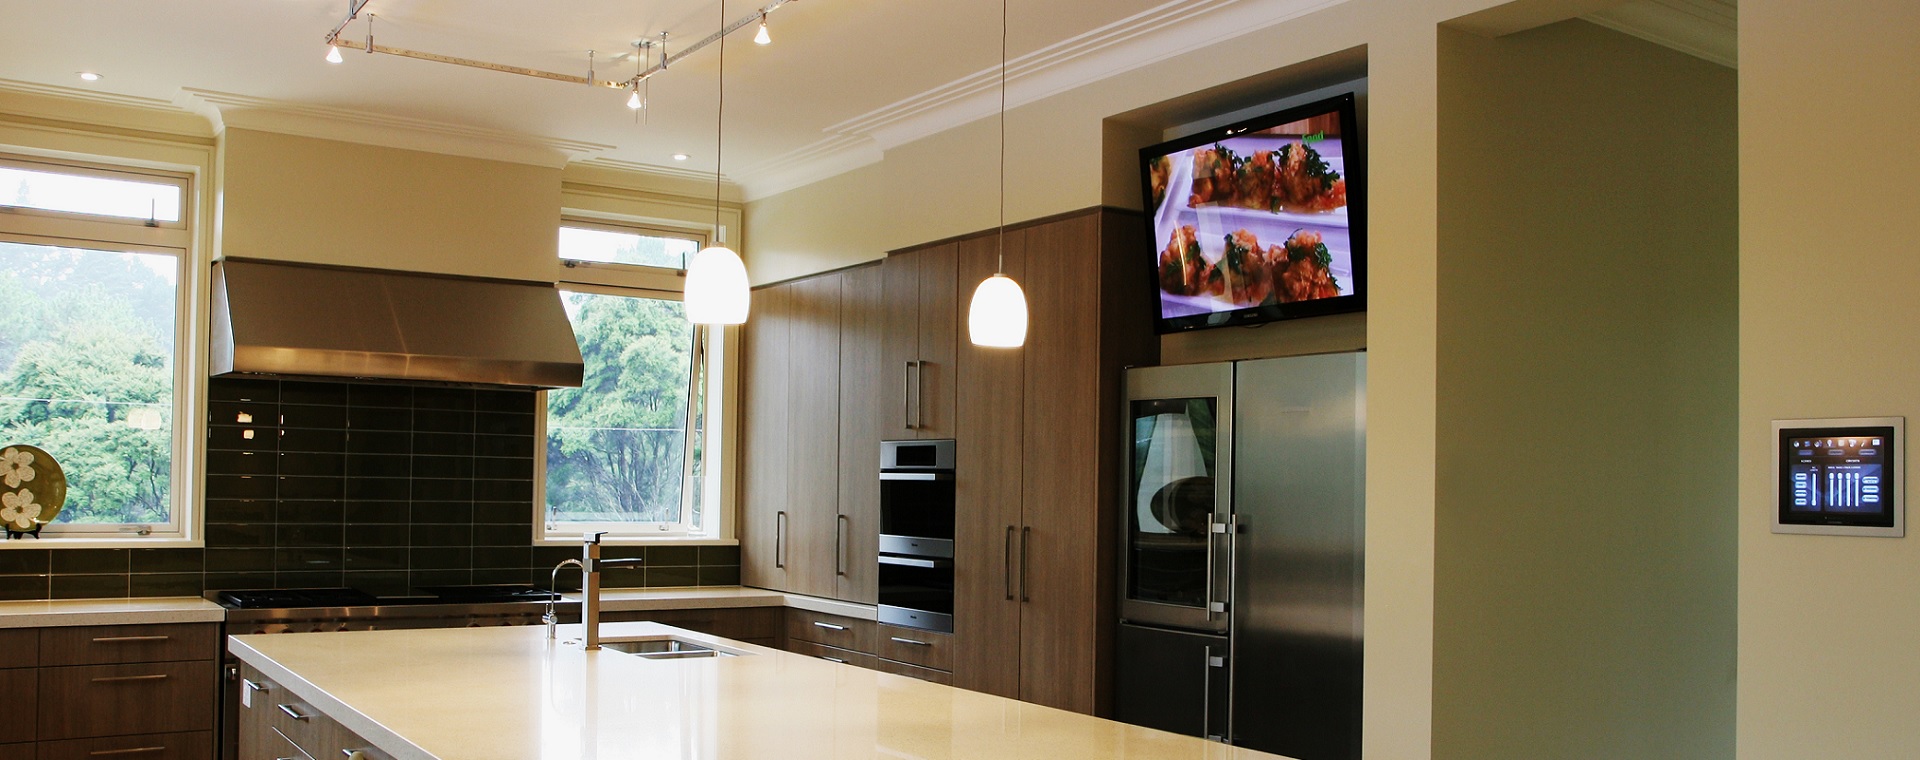 Modern kitchen with TV and touchscreen for control of entertainment, lighting and automation systems